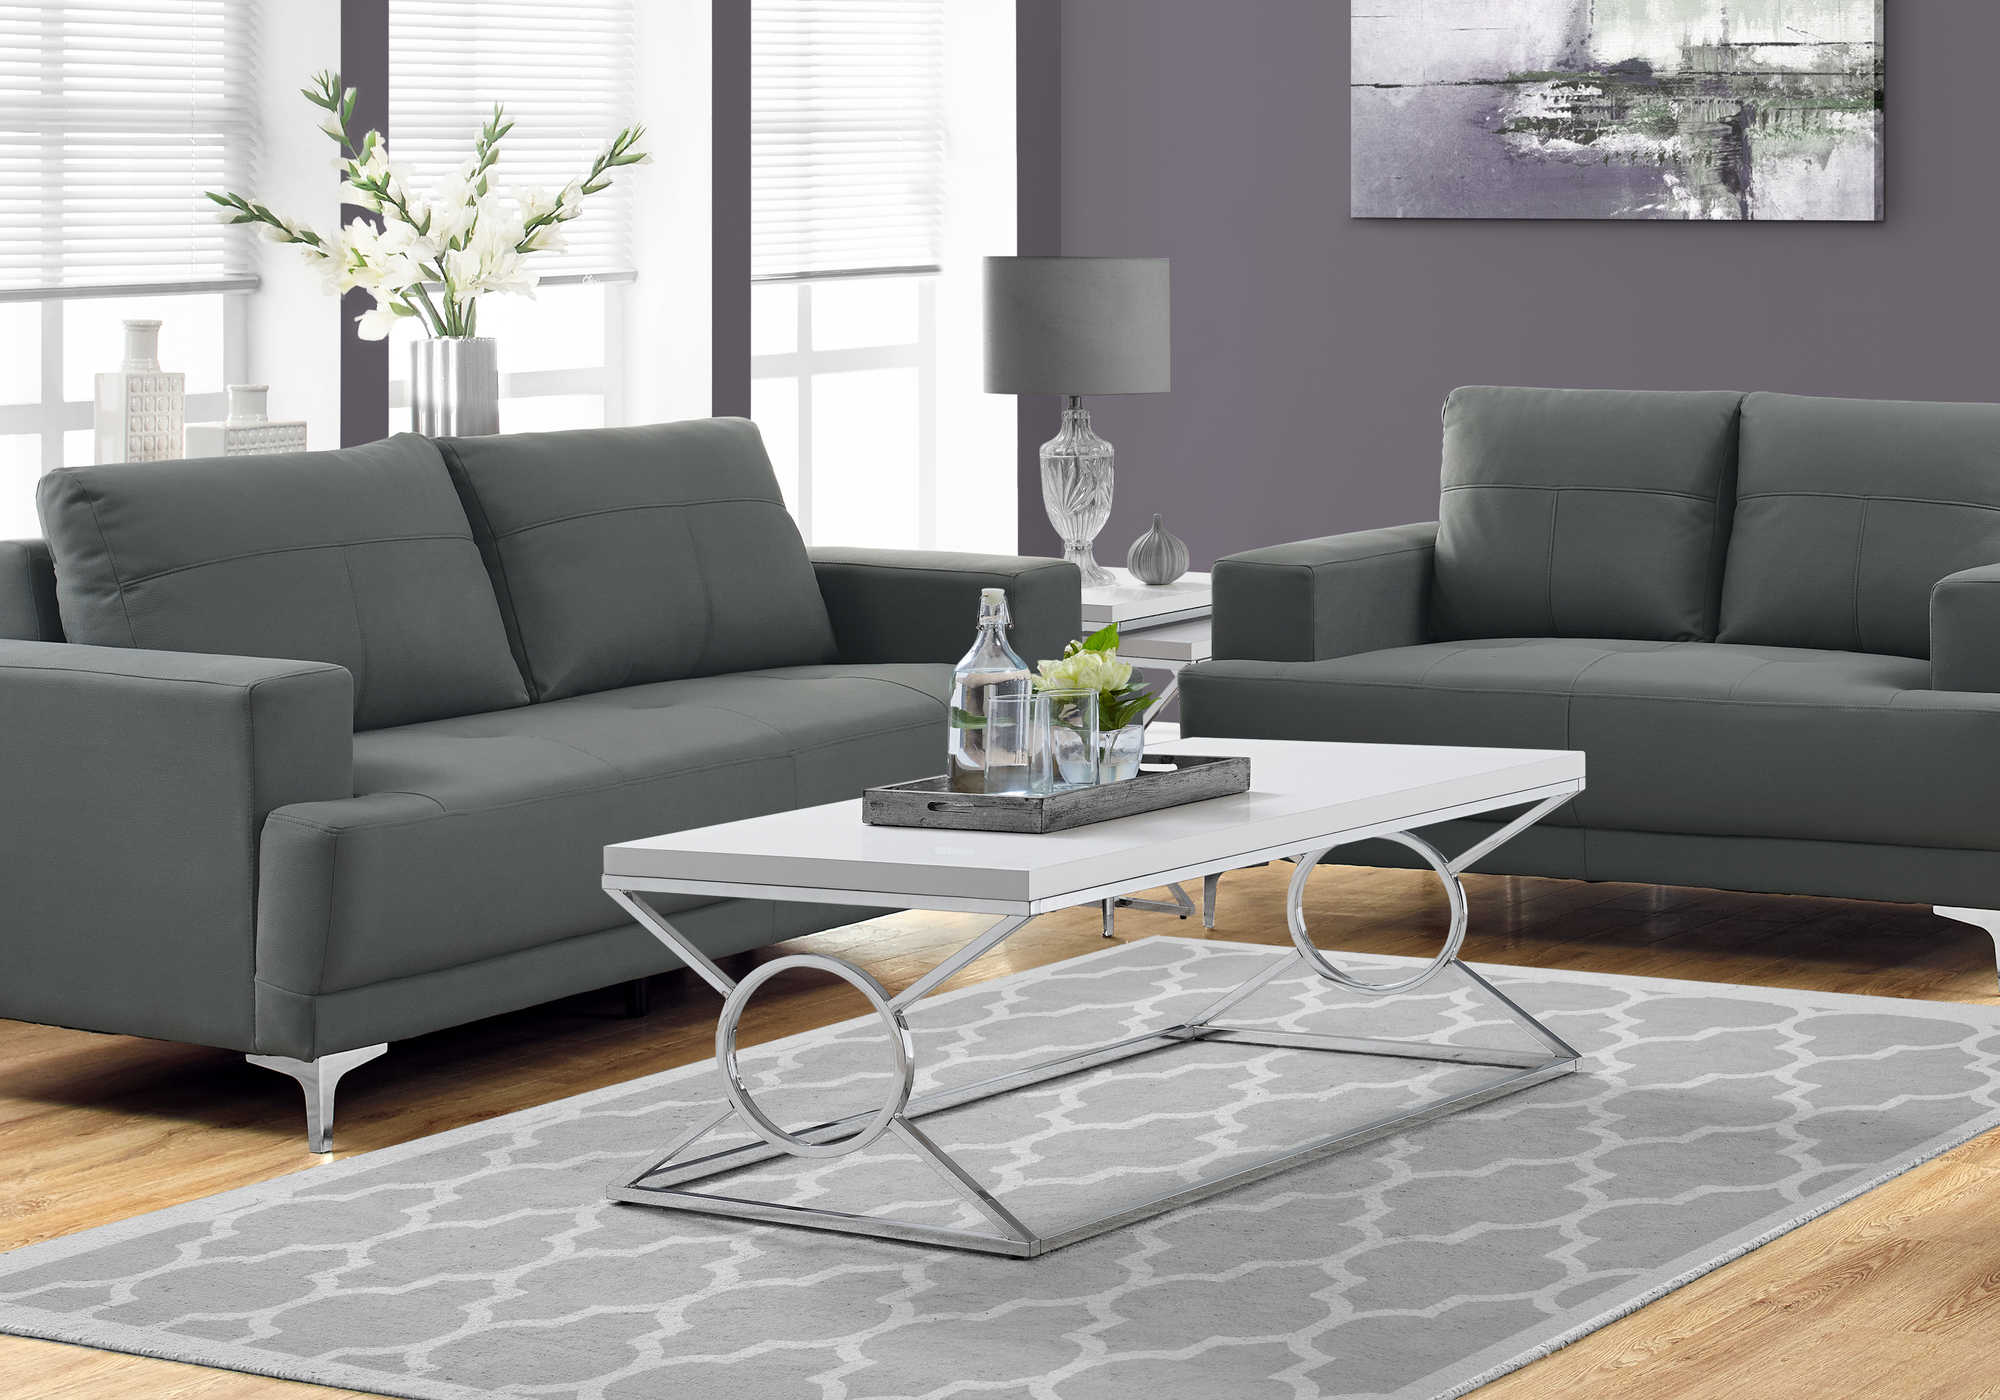 COFFEE TABLE - GLOSSY WHITE WITH CHROME METAL